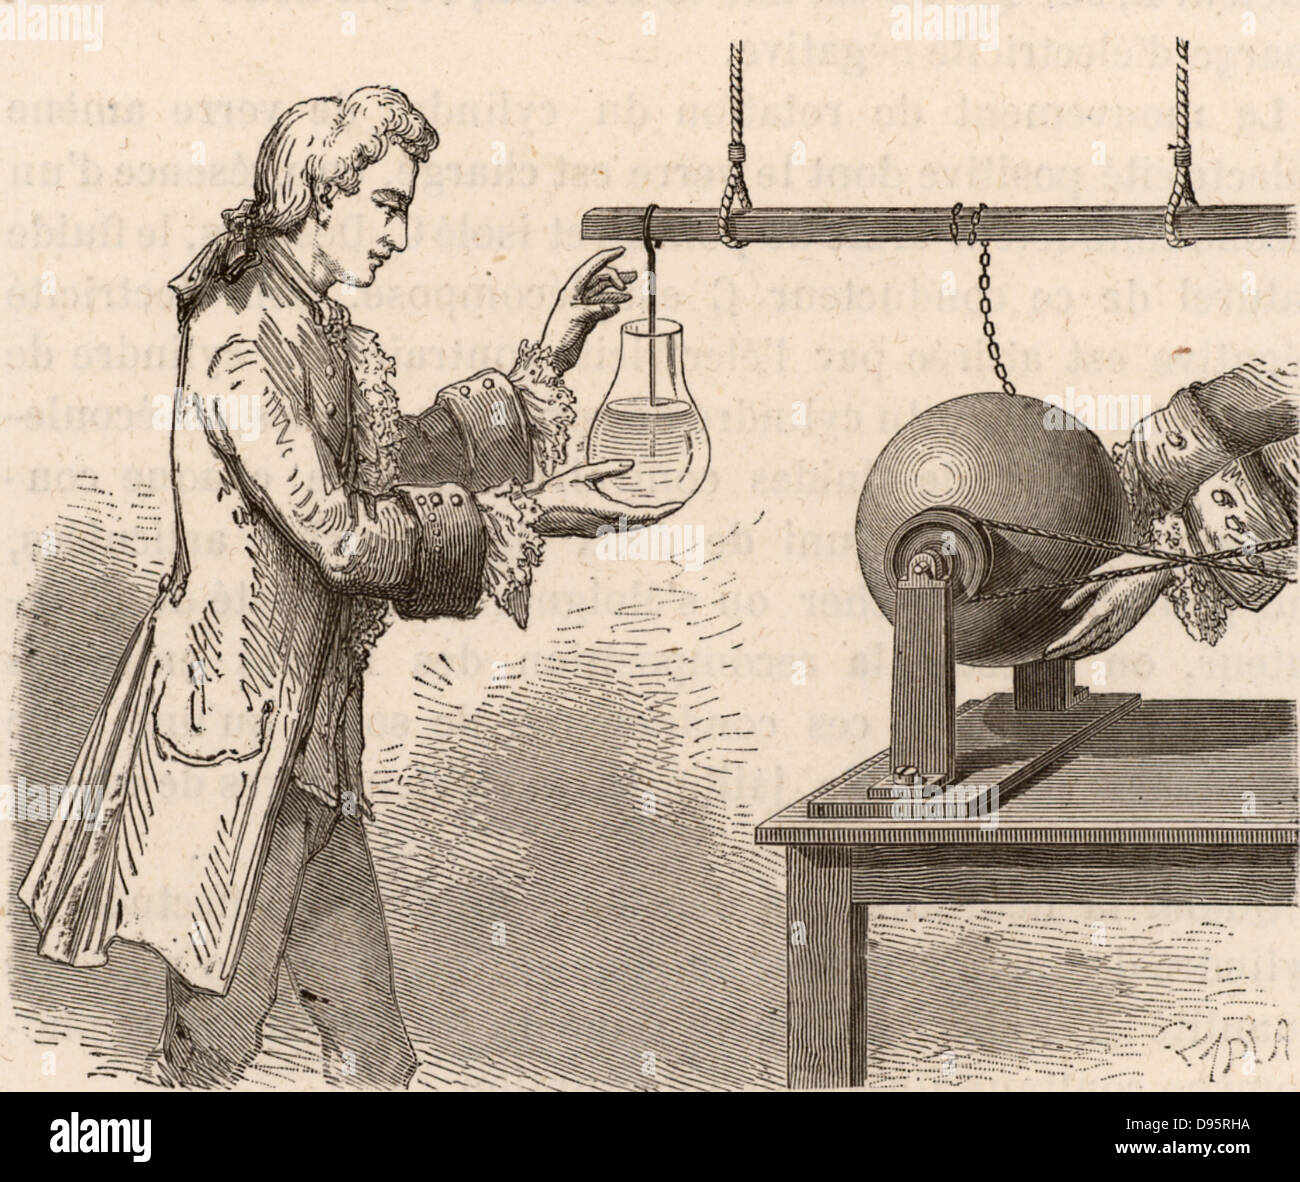 The origin of the Leyden Jar. Andreas Cuneus (1712-1778) Dutch lawyer and scientist, in the laboratory of Pieter von Musschenbroek (1692-1761),  attempting to electrify water contained in a bottle with the charge created by the friction from a glass globe static electric machine, Leyden, 1746.  Musschenbroek repeated the experiment and was surprised by the electric shock he received.  Engraving from 'Electricity in the Service of Man' by Amedee Guillemin (London, 1891). Stock Photo